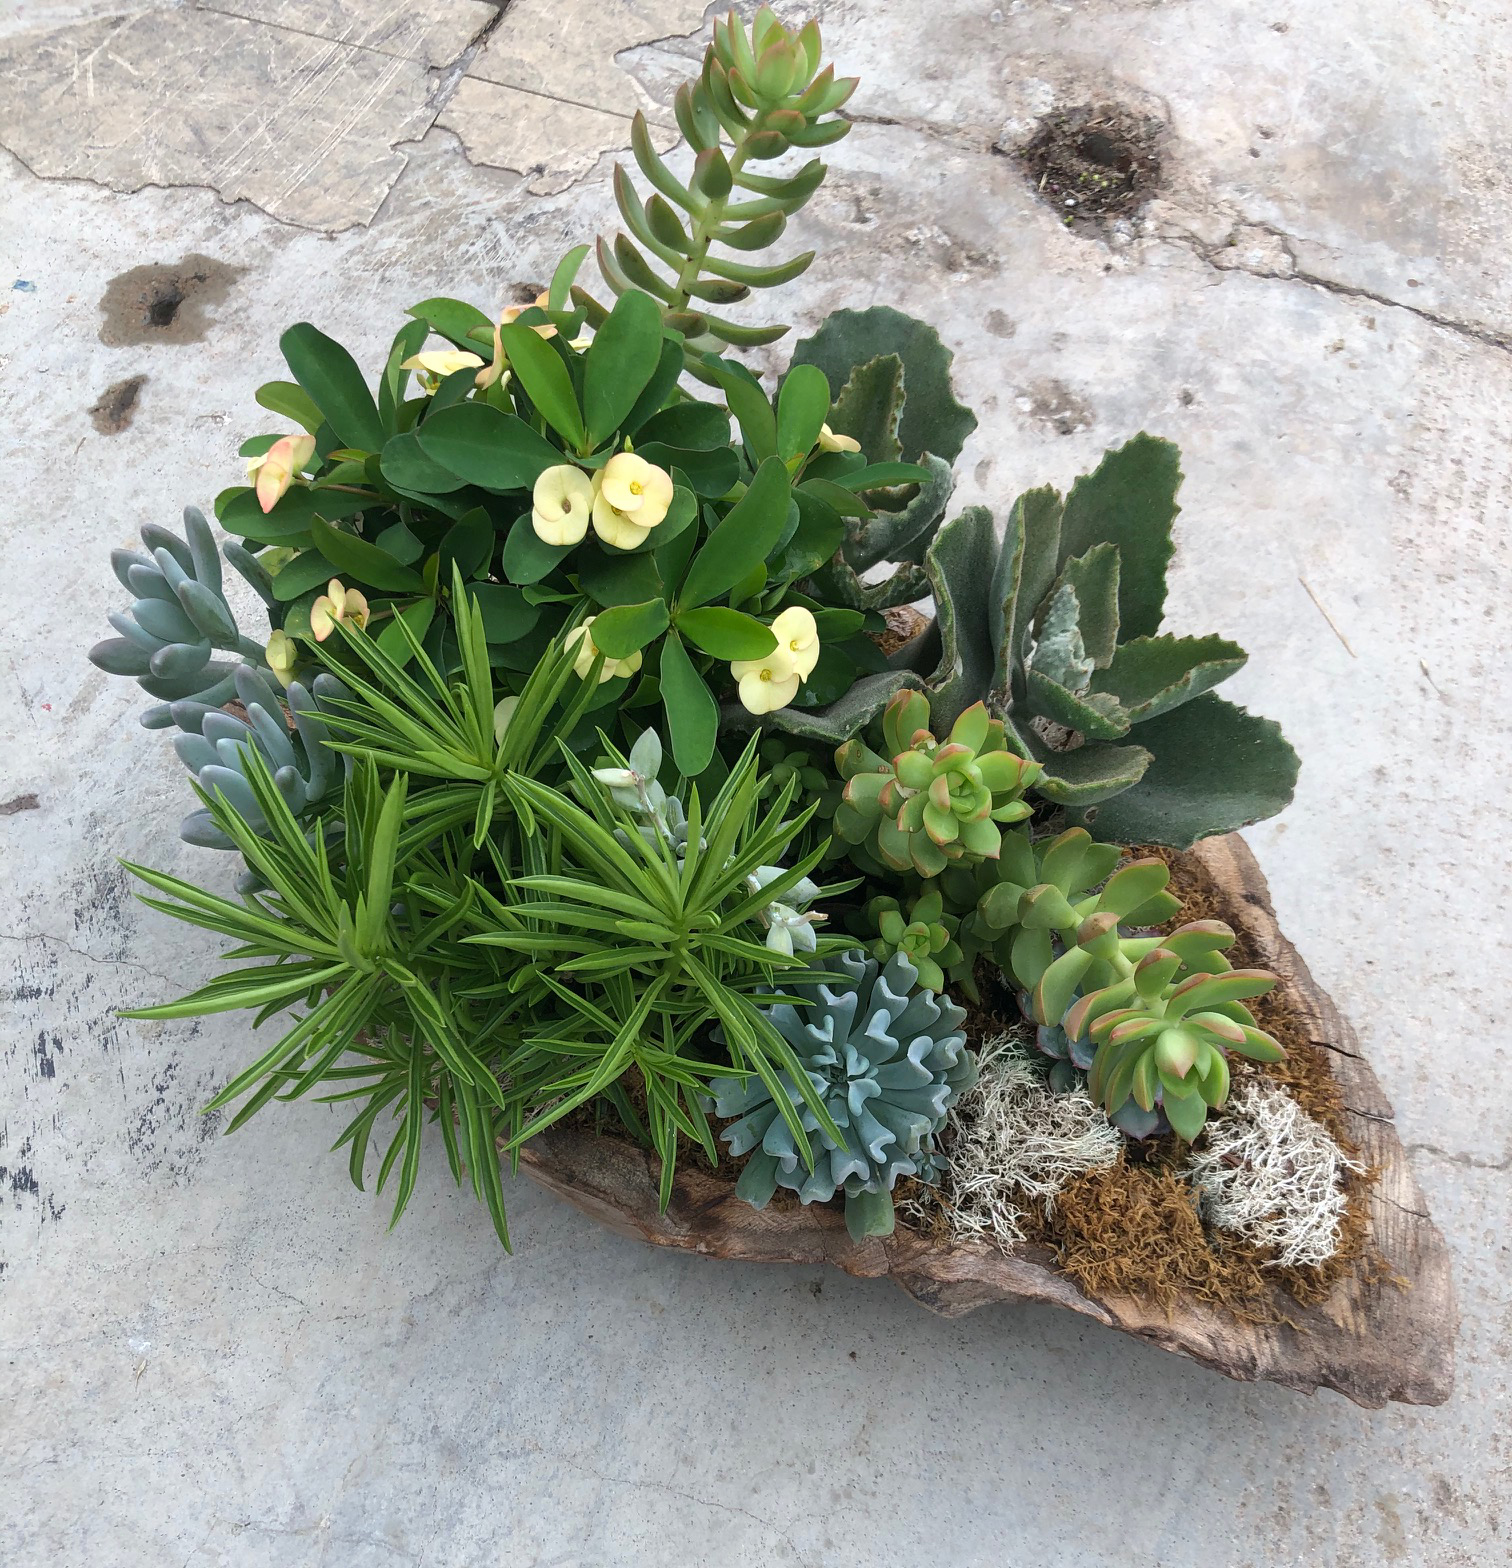 The most common shared feature of succulents is an adaptation that allows them to survive during periods of drought by developing thickened leaves, stems, or roots that can hold water and keep the plants alive.